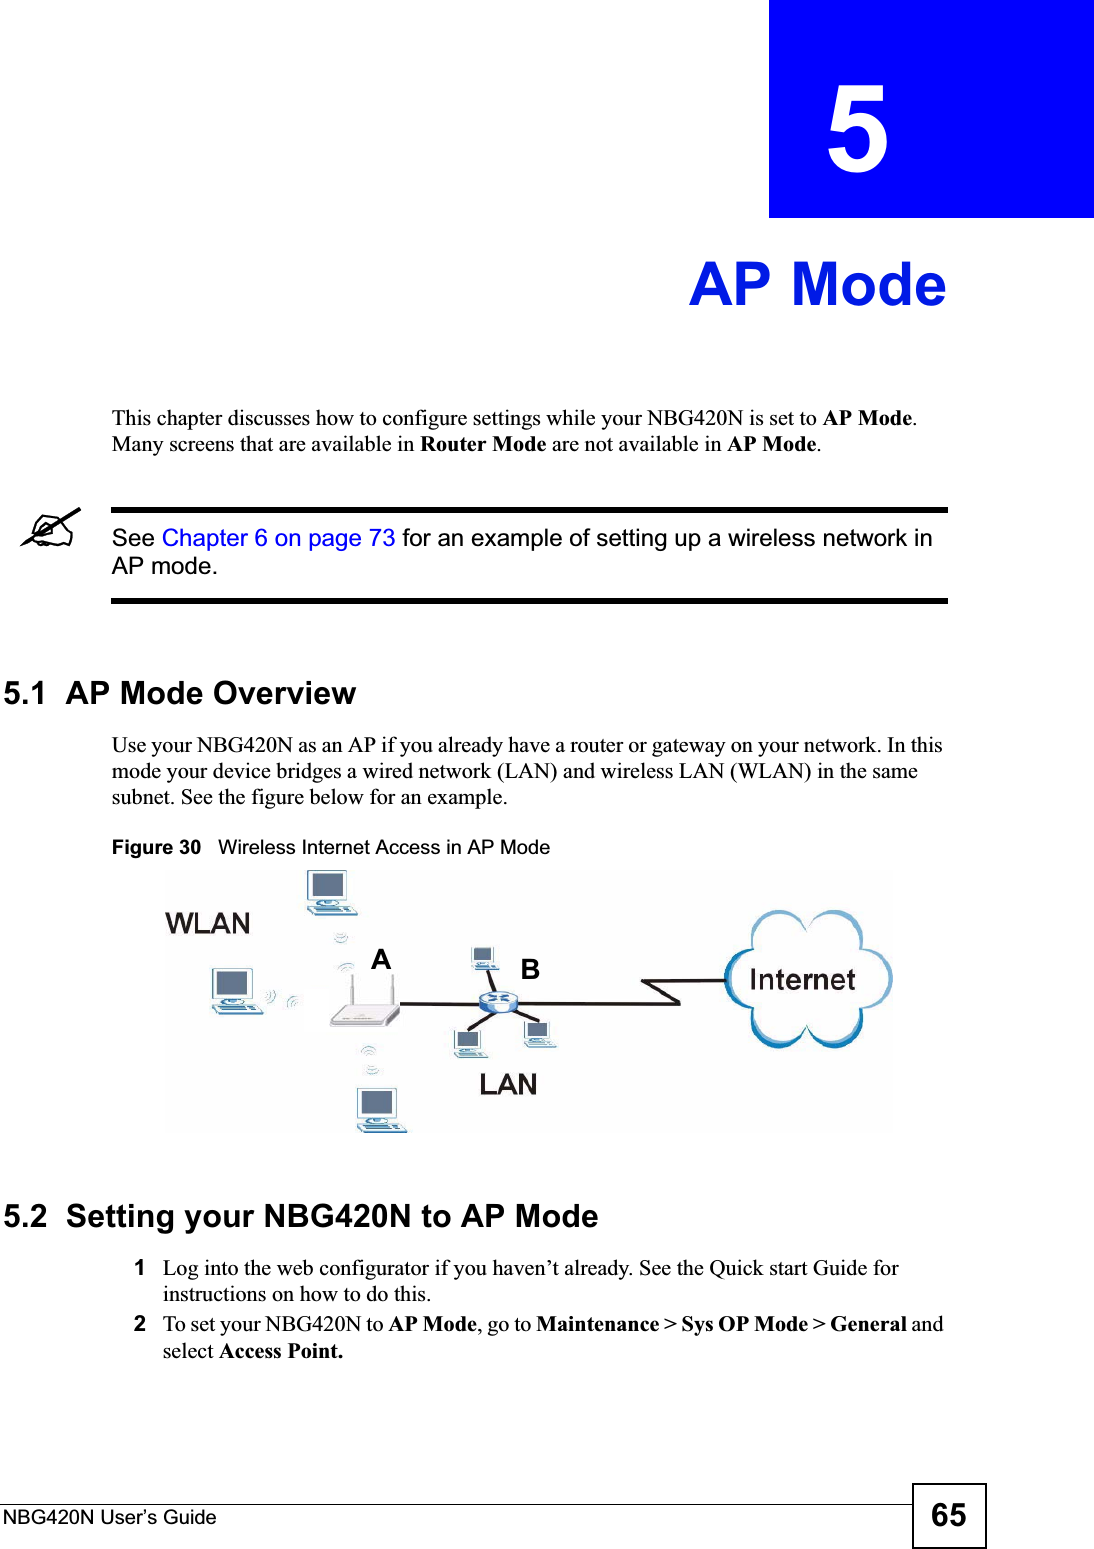 NBG420N User’s Guide 65CHAPTER  5 AP ModeThis chapter discusses how to configure settings while your NBG420N is set to AP Mode.Many screens that are available in Router Mode are not available in AP Mode.&quot;See Chapter 6 on page 73 for an example of setting up a wireless network in AP mode. 5.1  AP Mode OverviewUse your NBG420N as an AP if you already have a router or gateway on your network. In this mode your device bridges a wired network (LAN) and wireless LAN (WLAN) in the same subnet. See the figure below for an example.Figure 30   Wireless Internet Access in AP Mode 5.2  Setting your NBG420N to AP Mode1Log into the web configurator if you haven’t already. See the Quick start Guide for instructions on how to do this.2To set your NBG420N to AP Mode, go to Maintenance &gt; Sys OP Mode &gt; General andselect Access Point.AB